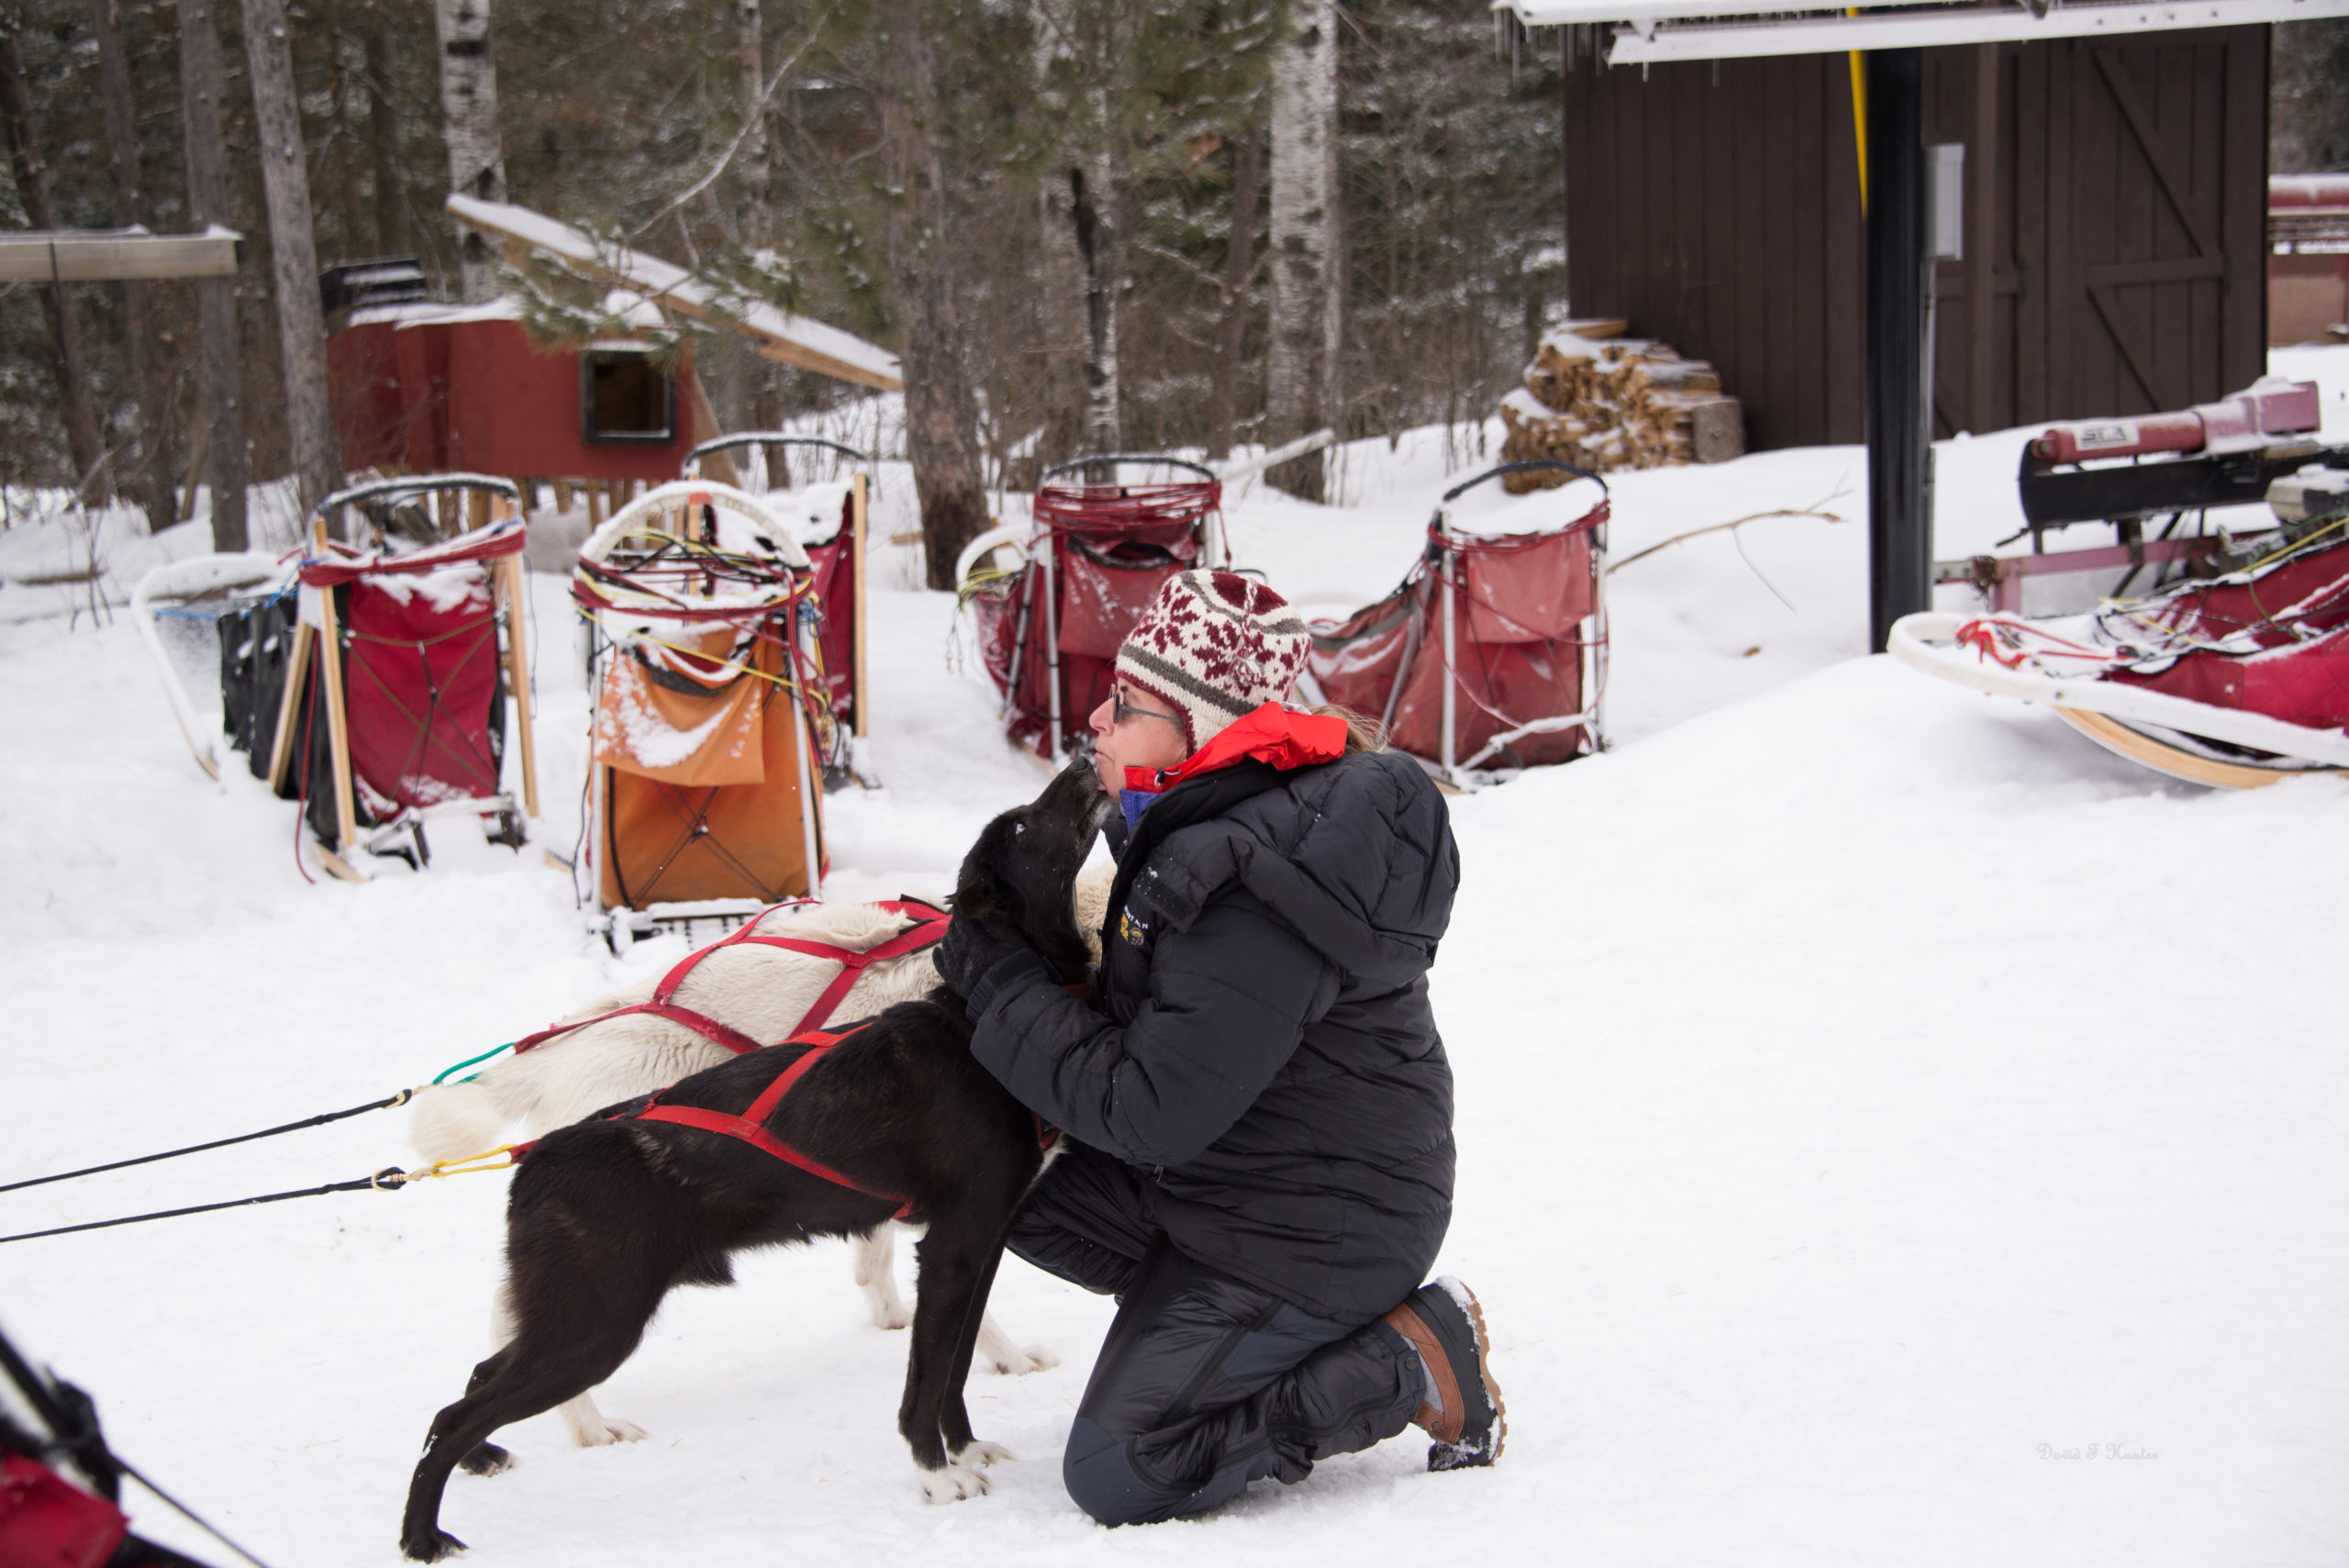 Two White Wilderness sled dogs licking a person kneeled in fron of the team on a day trip.